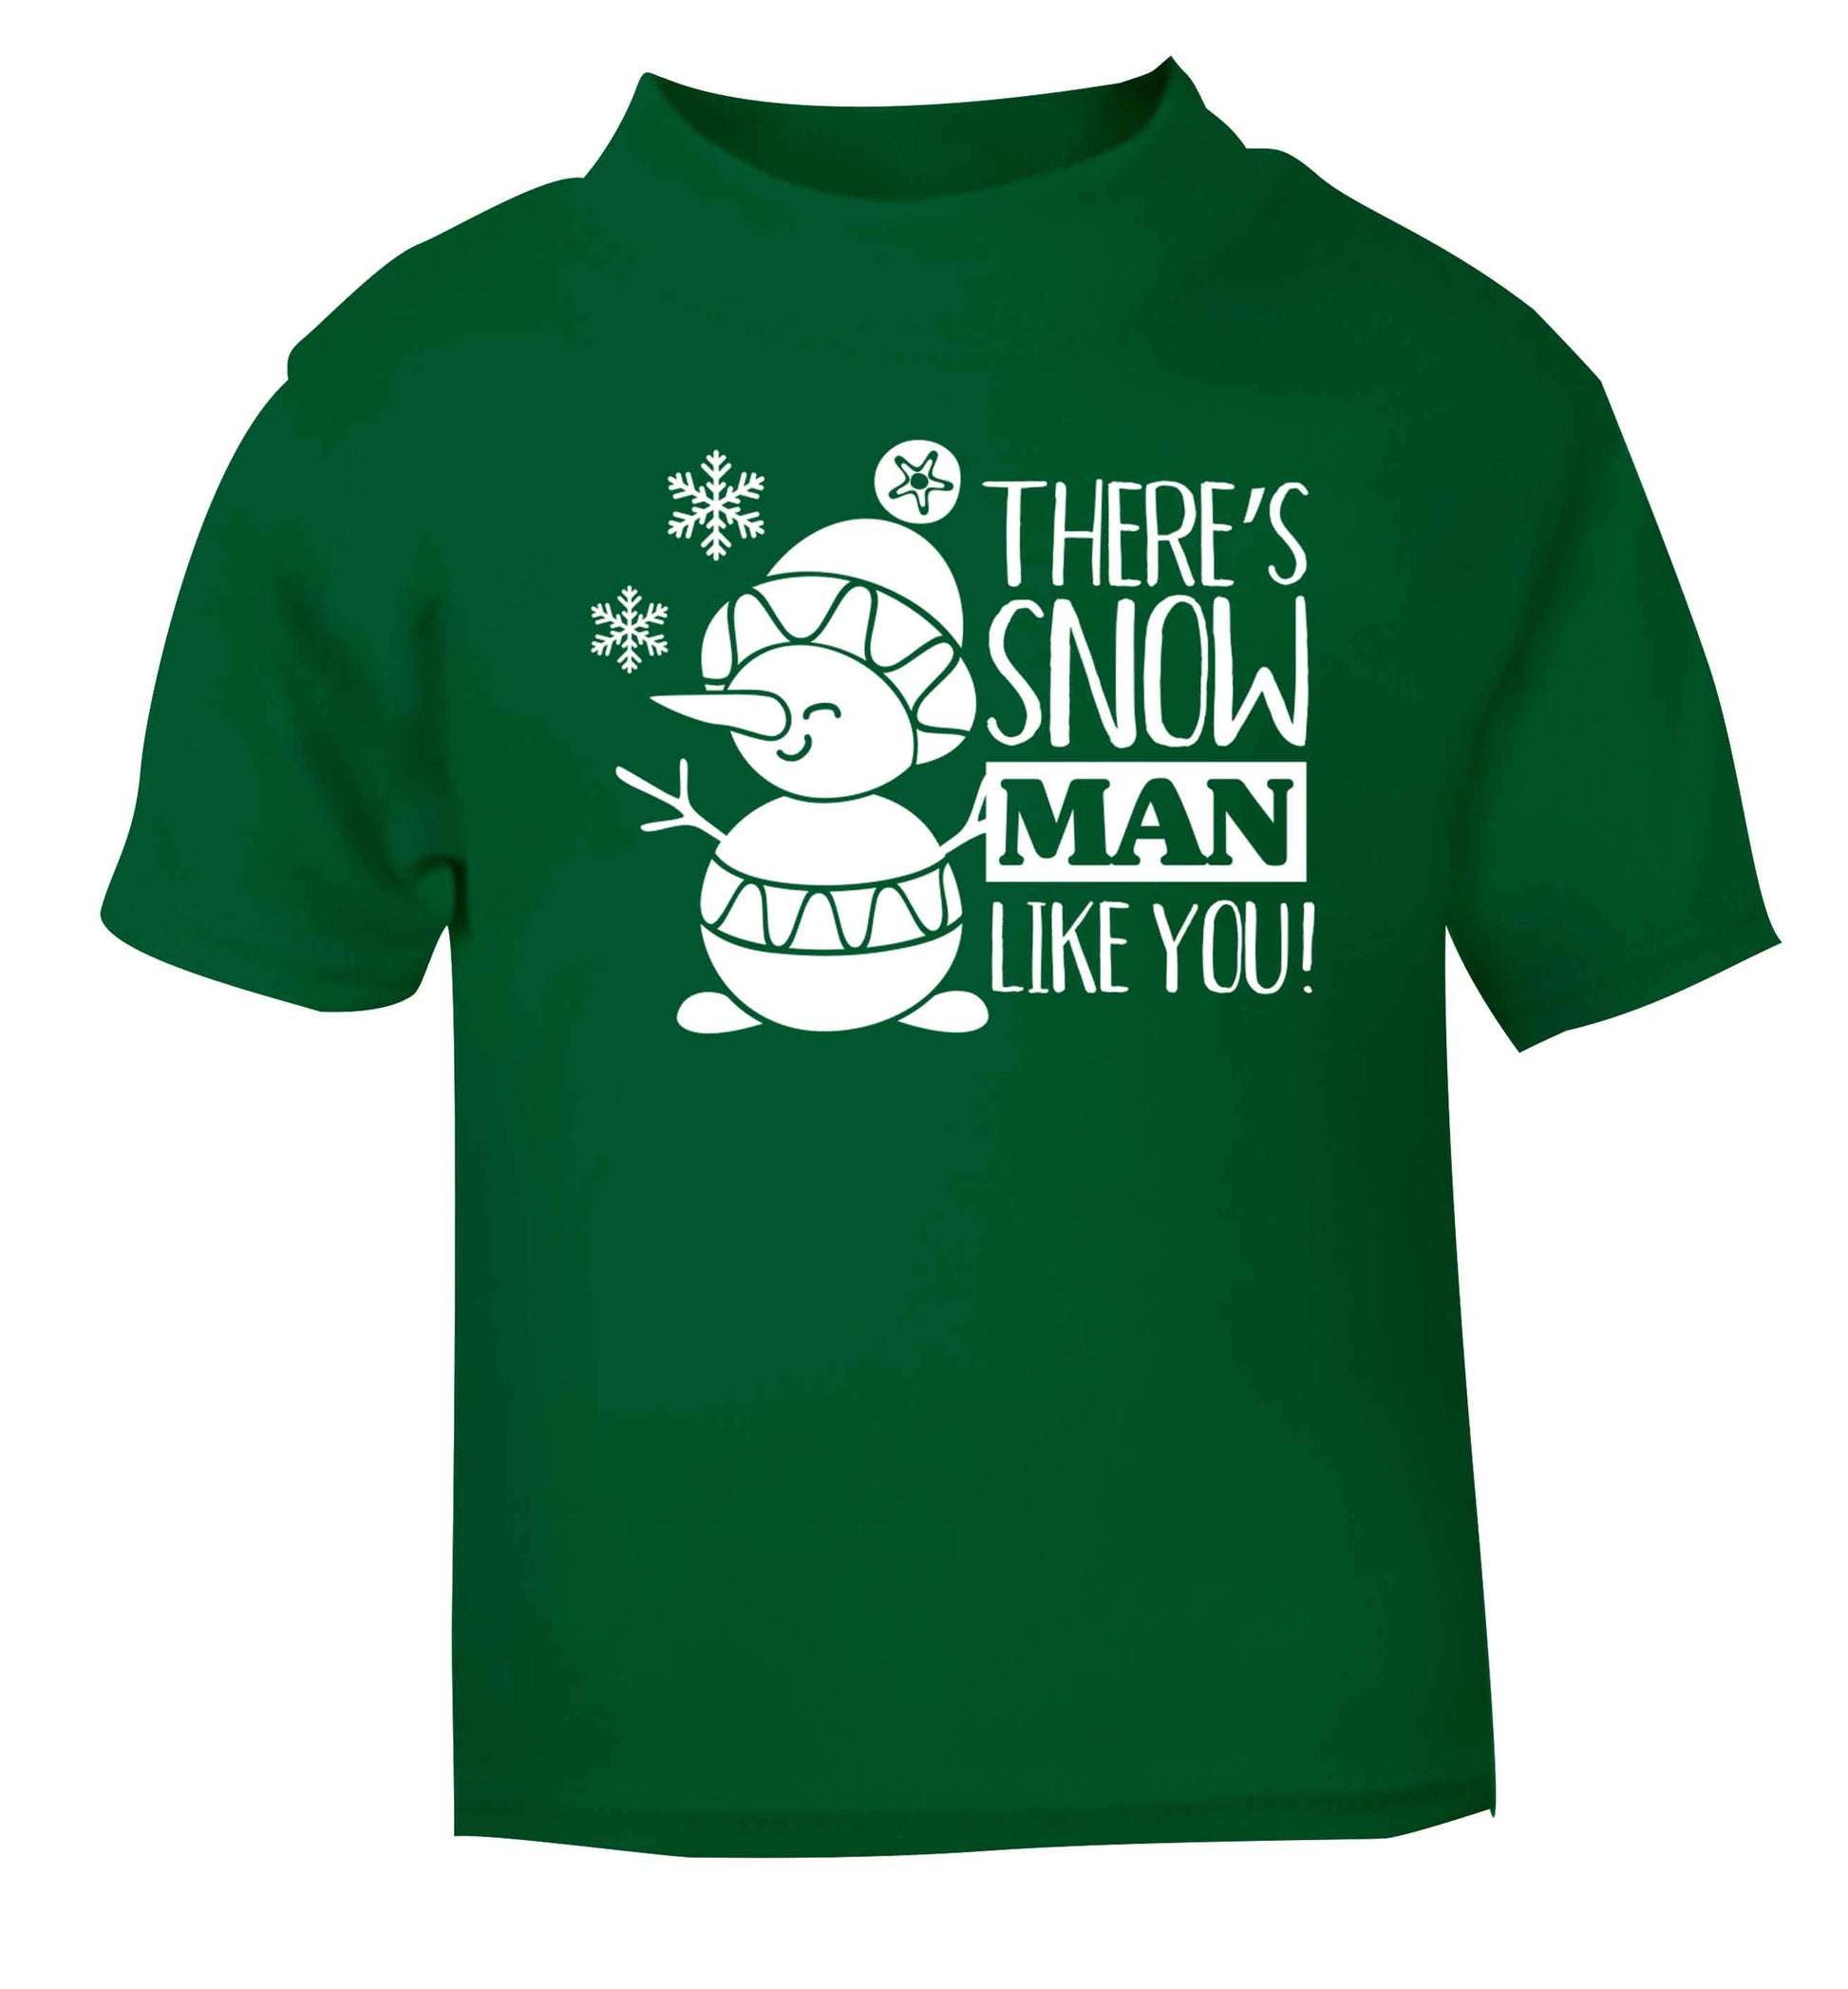 There's snow man like you green baby toddler Tshirt 2 Years